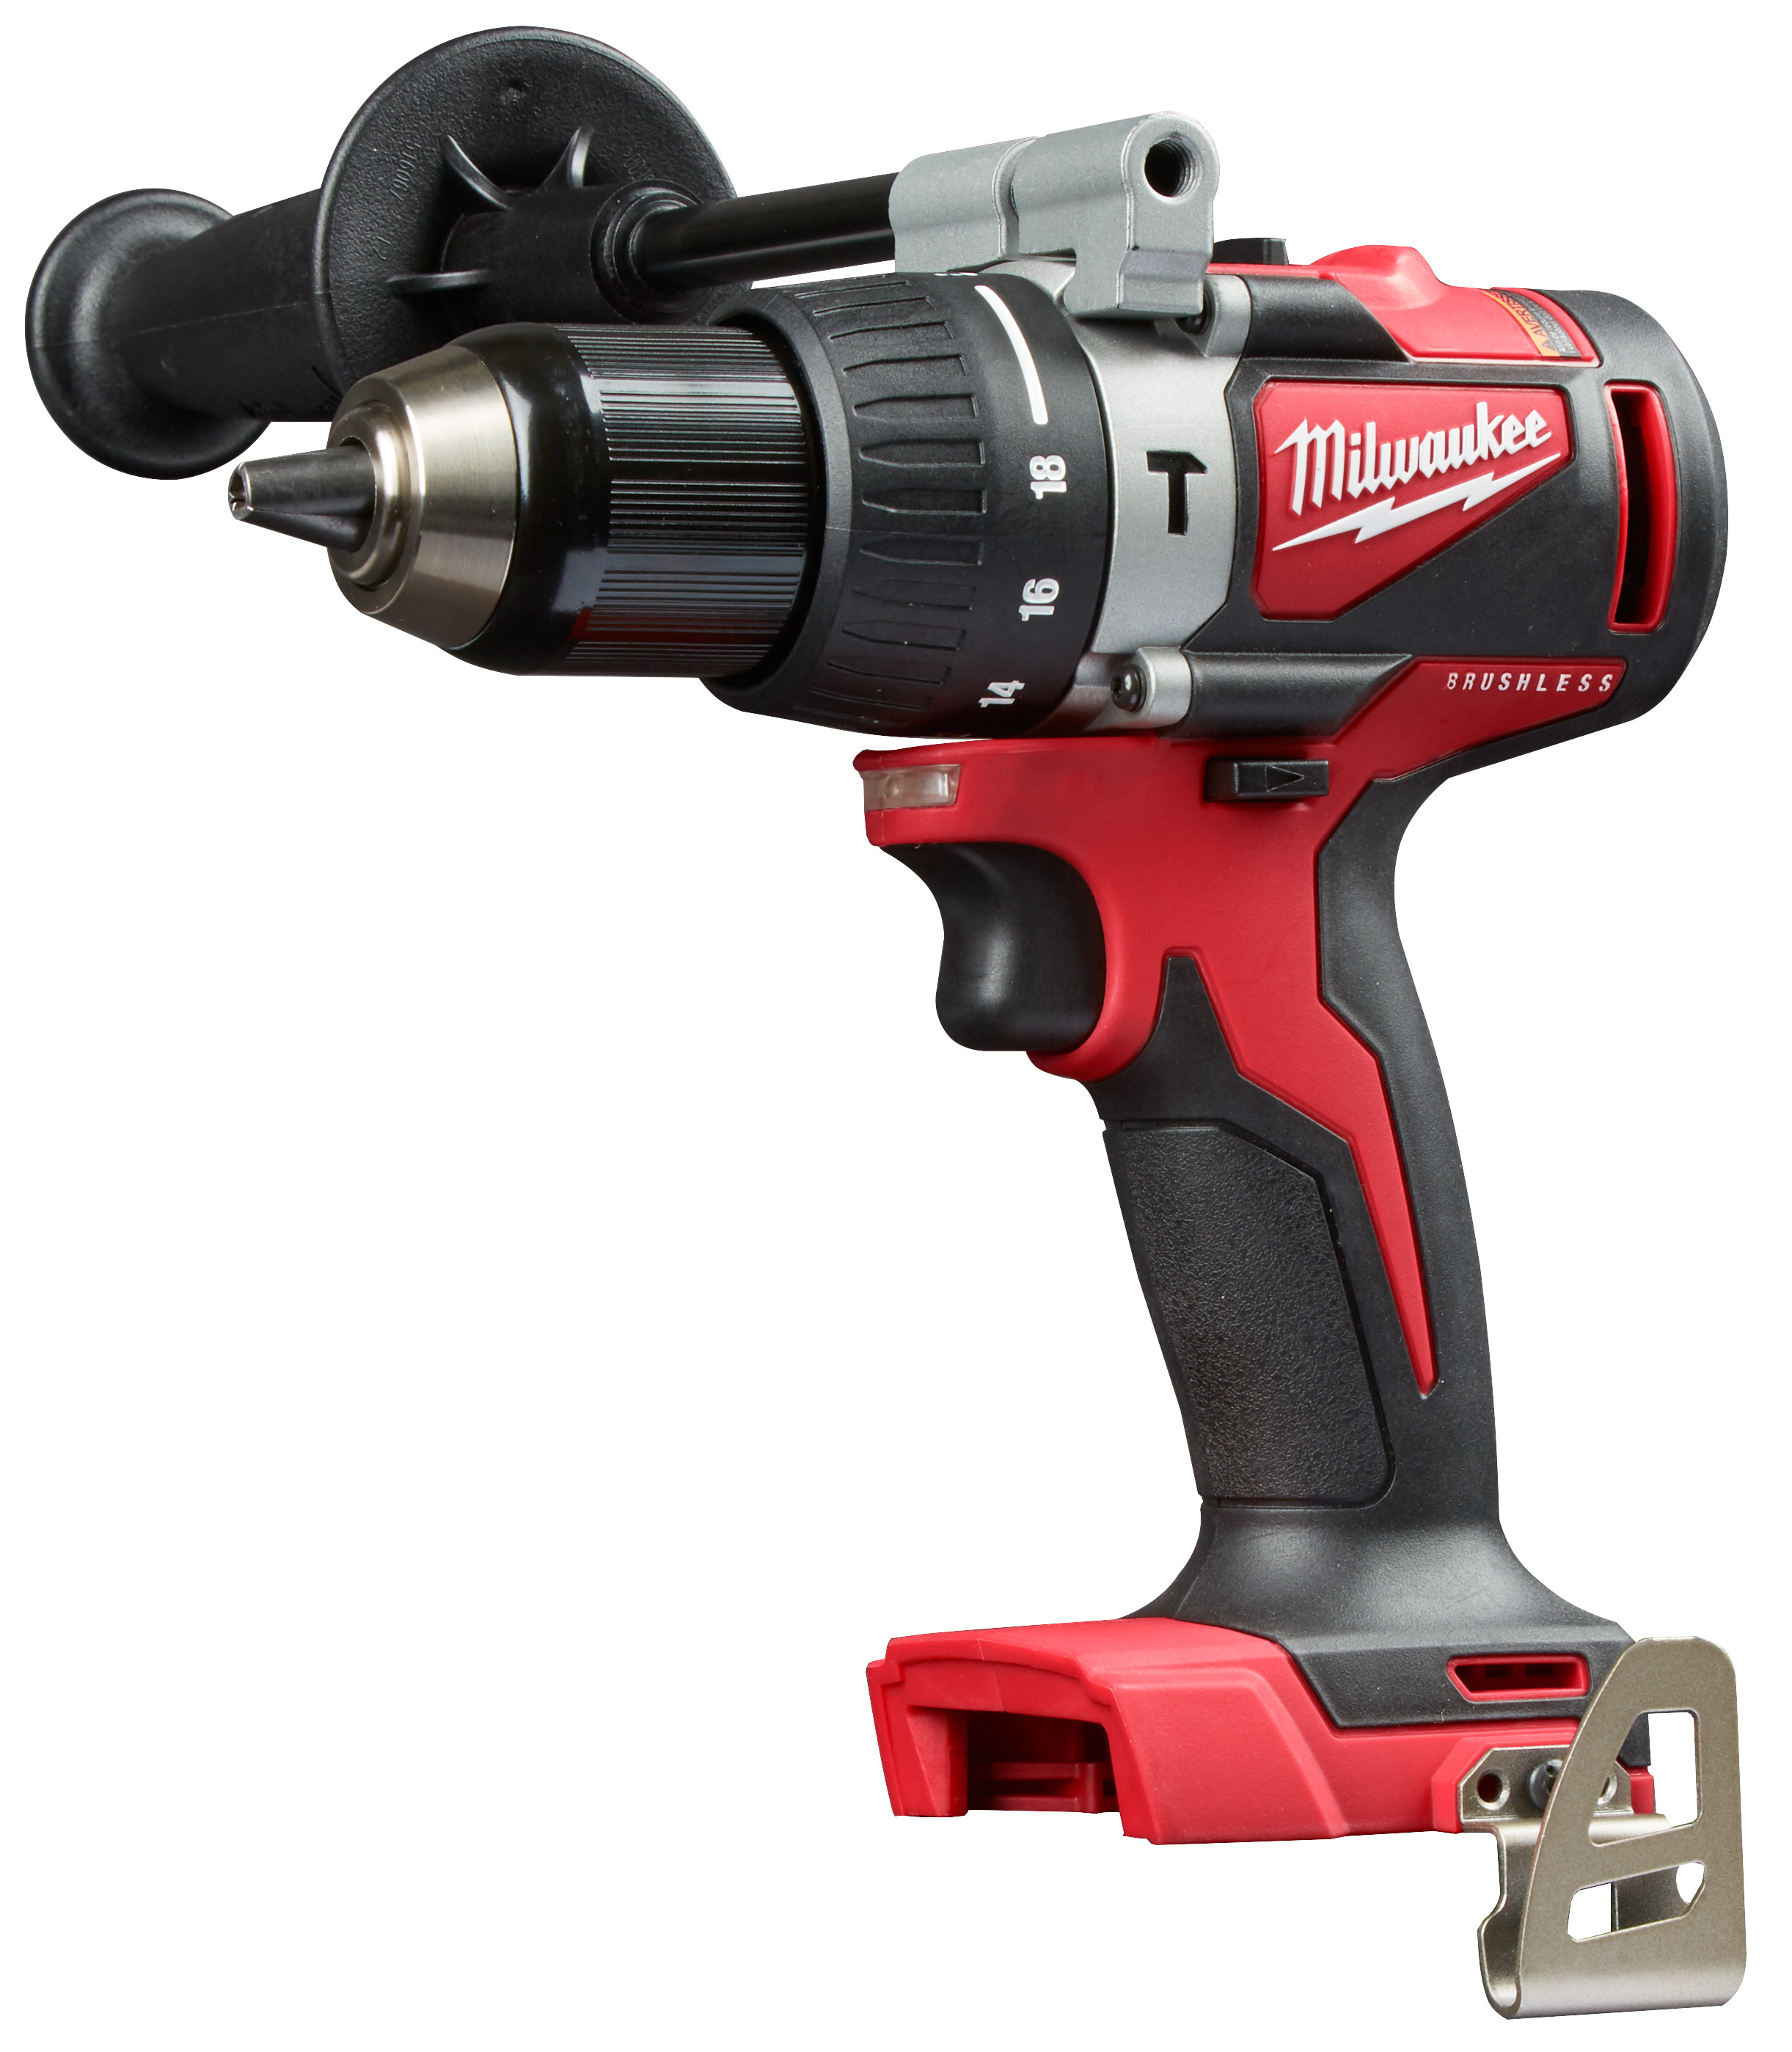 M18 18 Volt Lithium Ion Cordless 1/2 in. Brushless Hammer Drill  - Tool Only